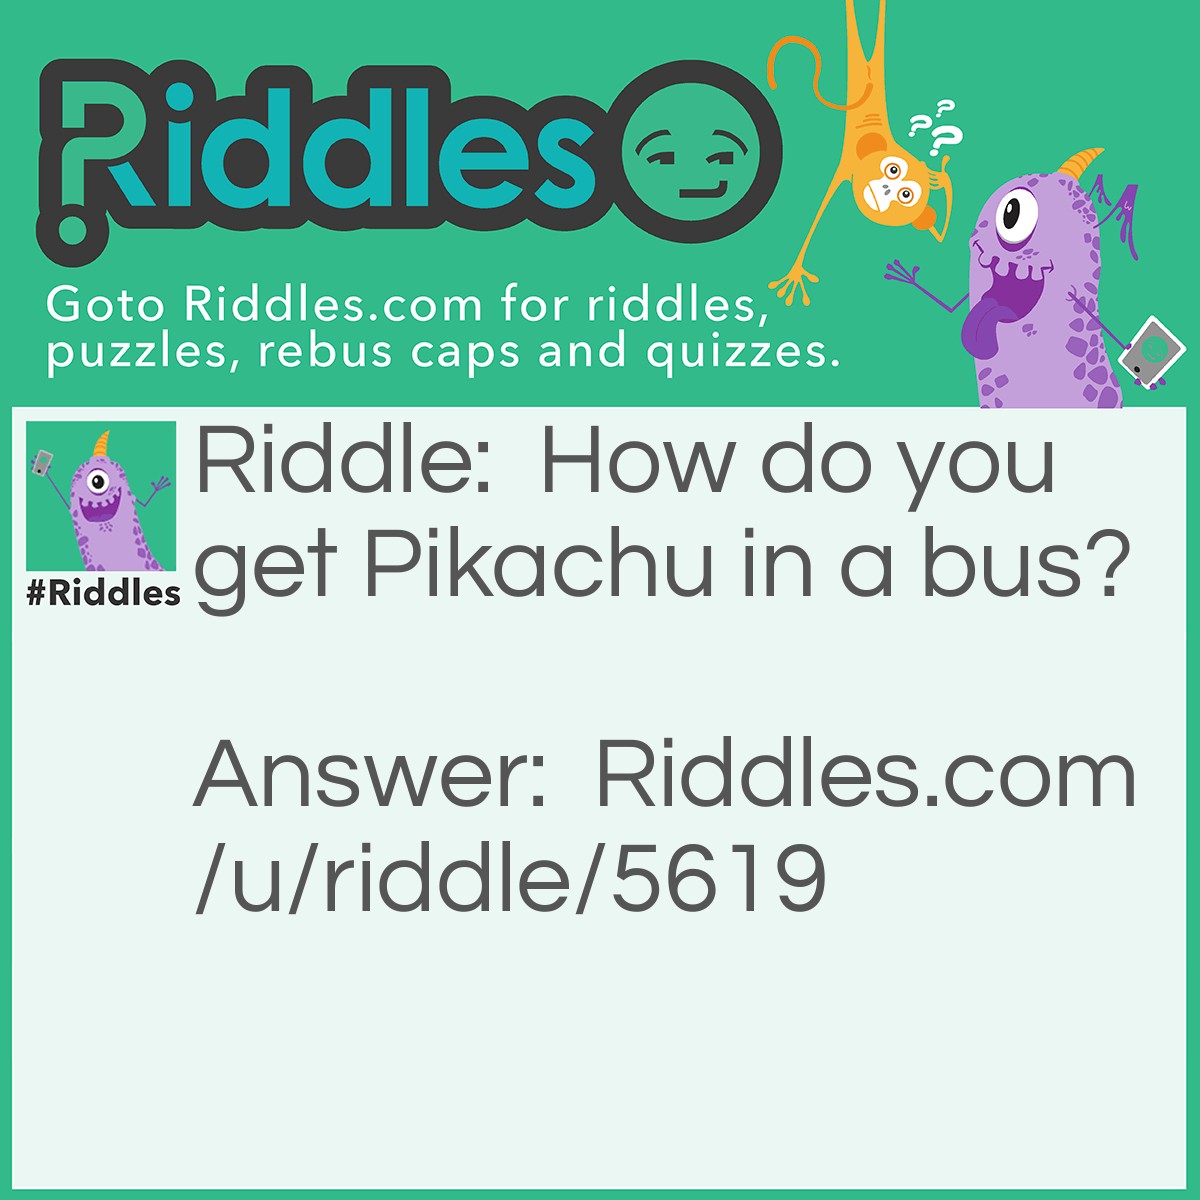 Riddle: How do you get Pikachu in a bus? Answer: You Pokémon (Poke him on)!